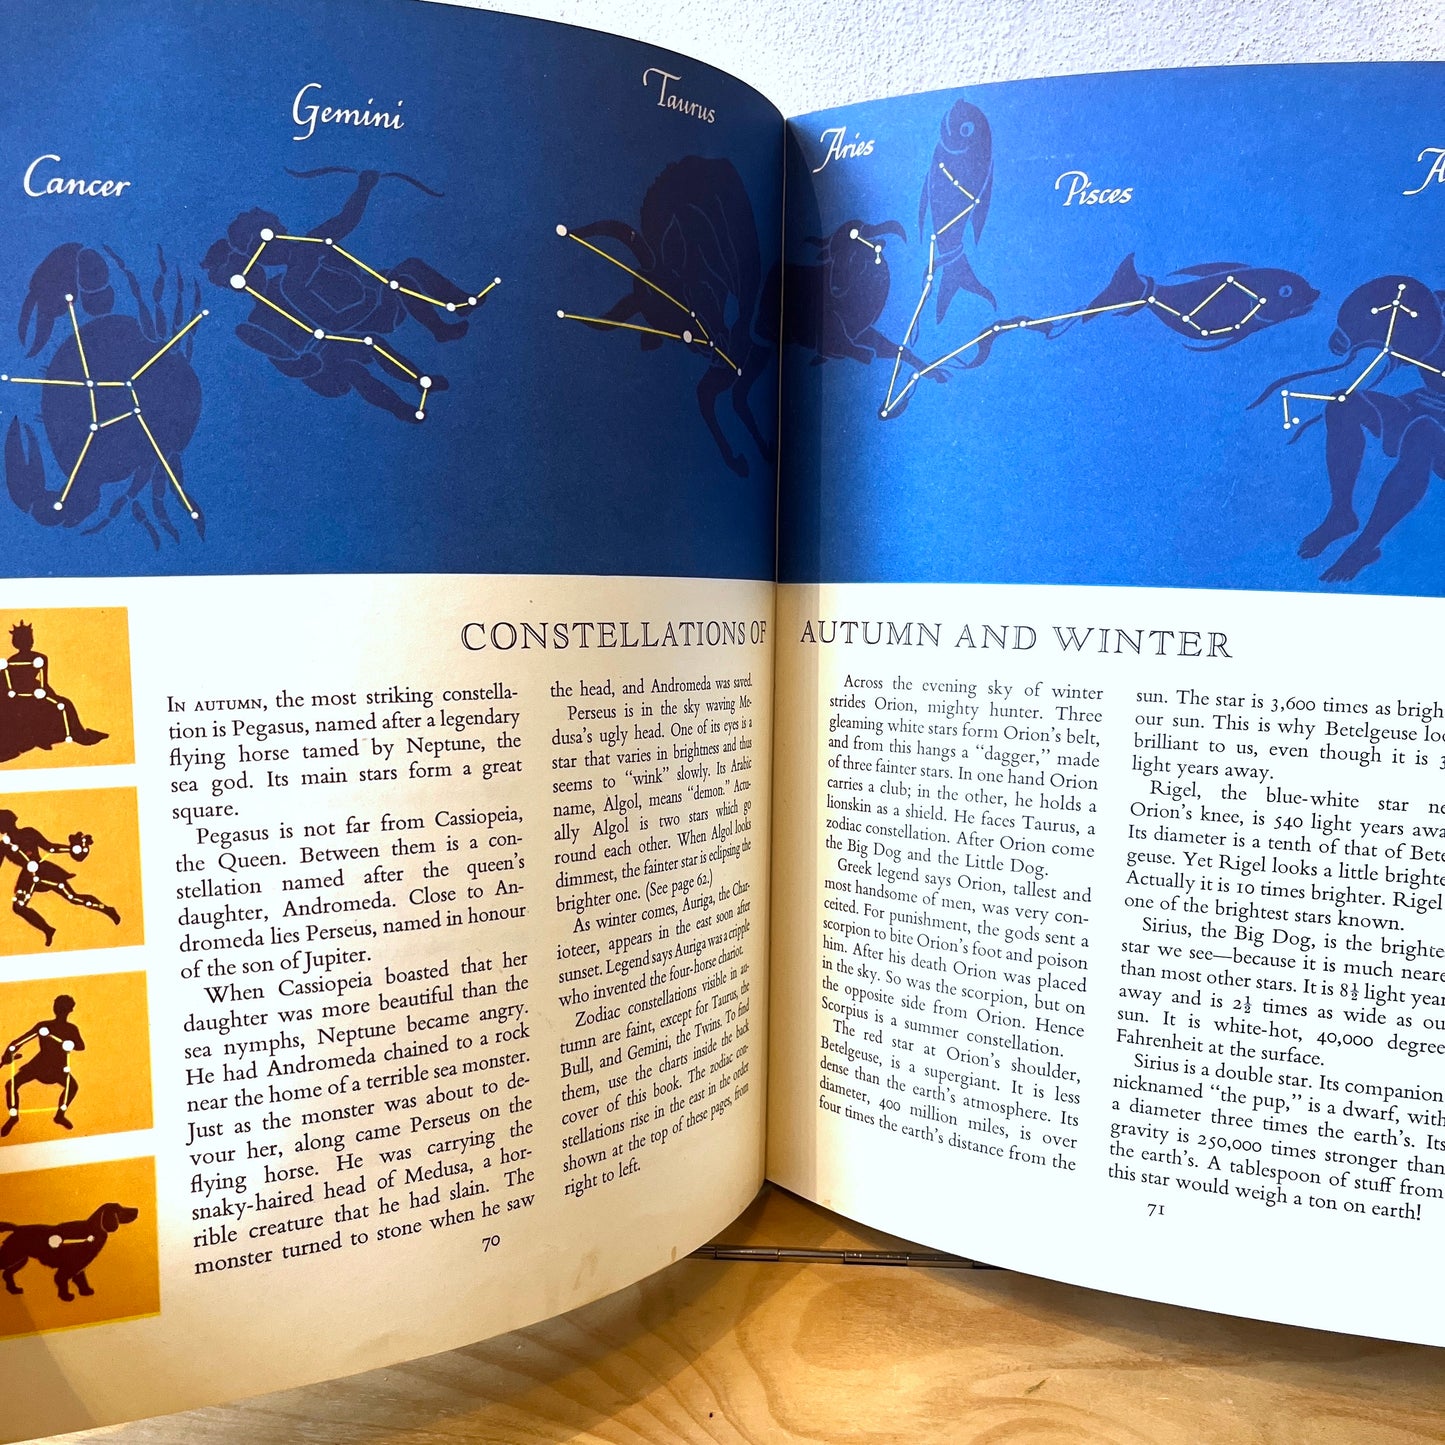 The Golden Book of Astronomy. An Introduction to the Wonders of Space